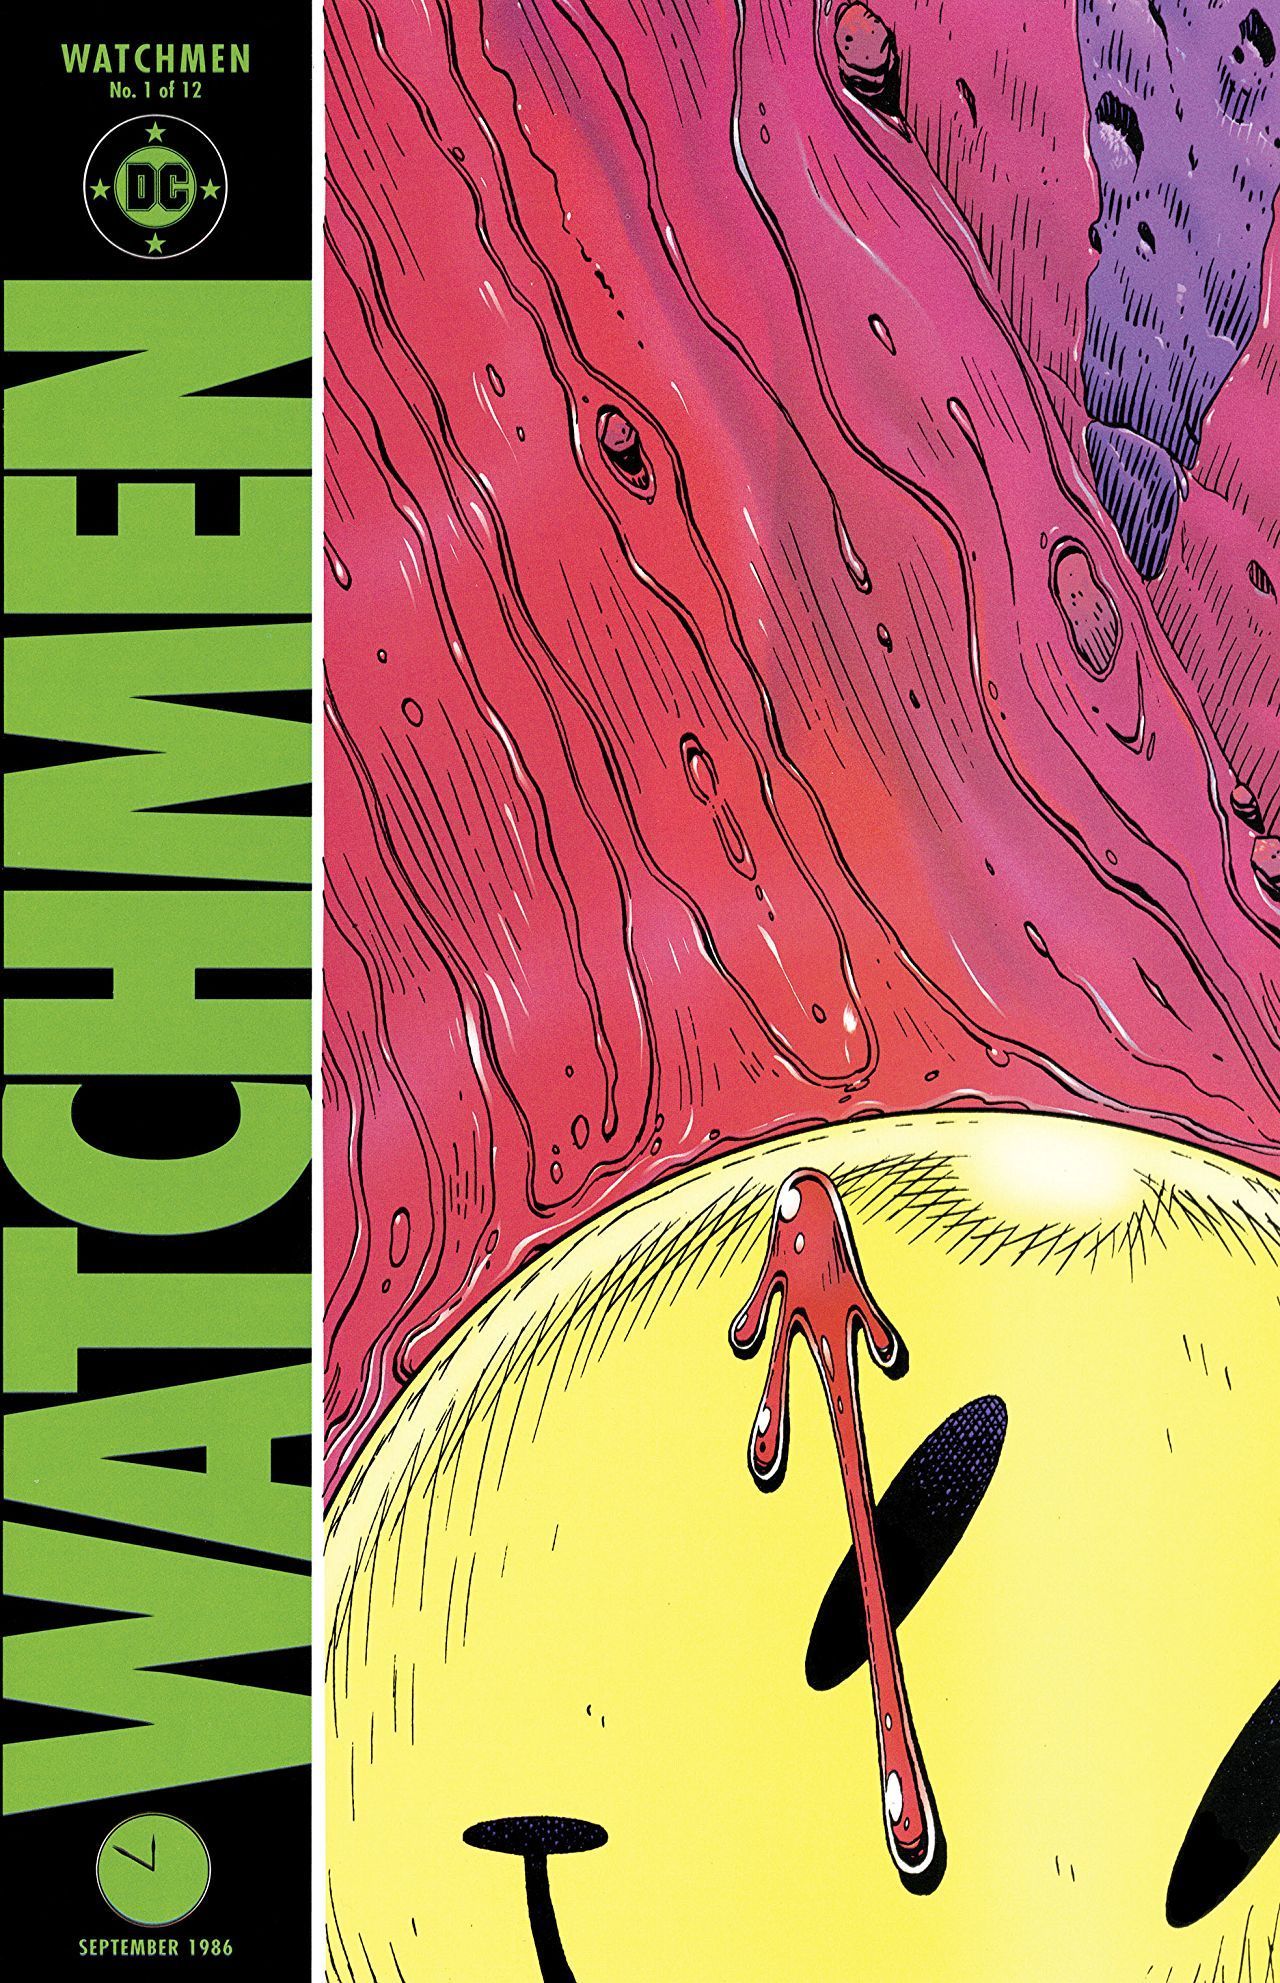 Watchmen #1 - At Midnight, All The Agents... released by DC Comics on September 1, 1986